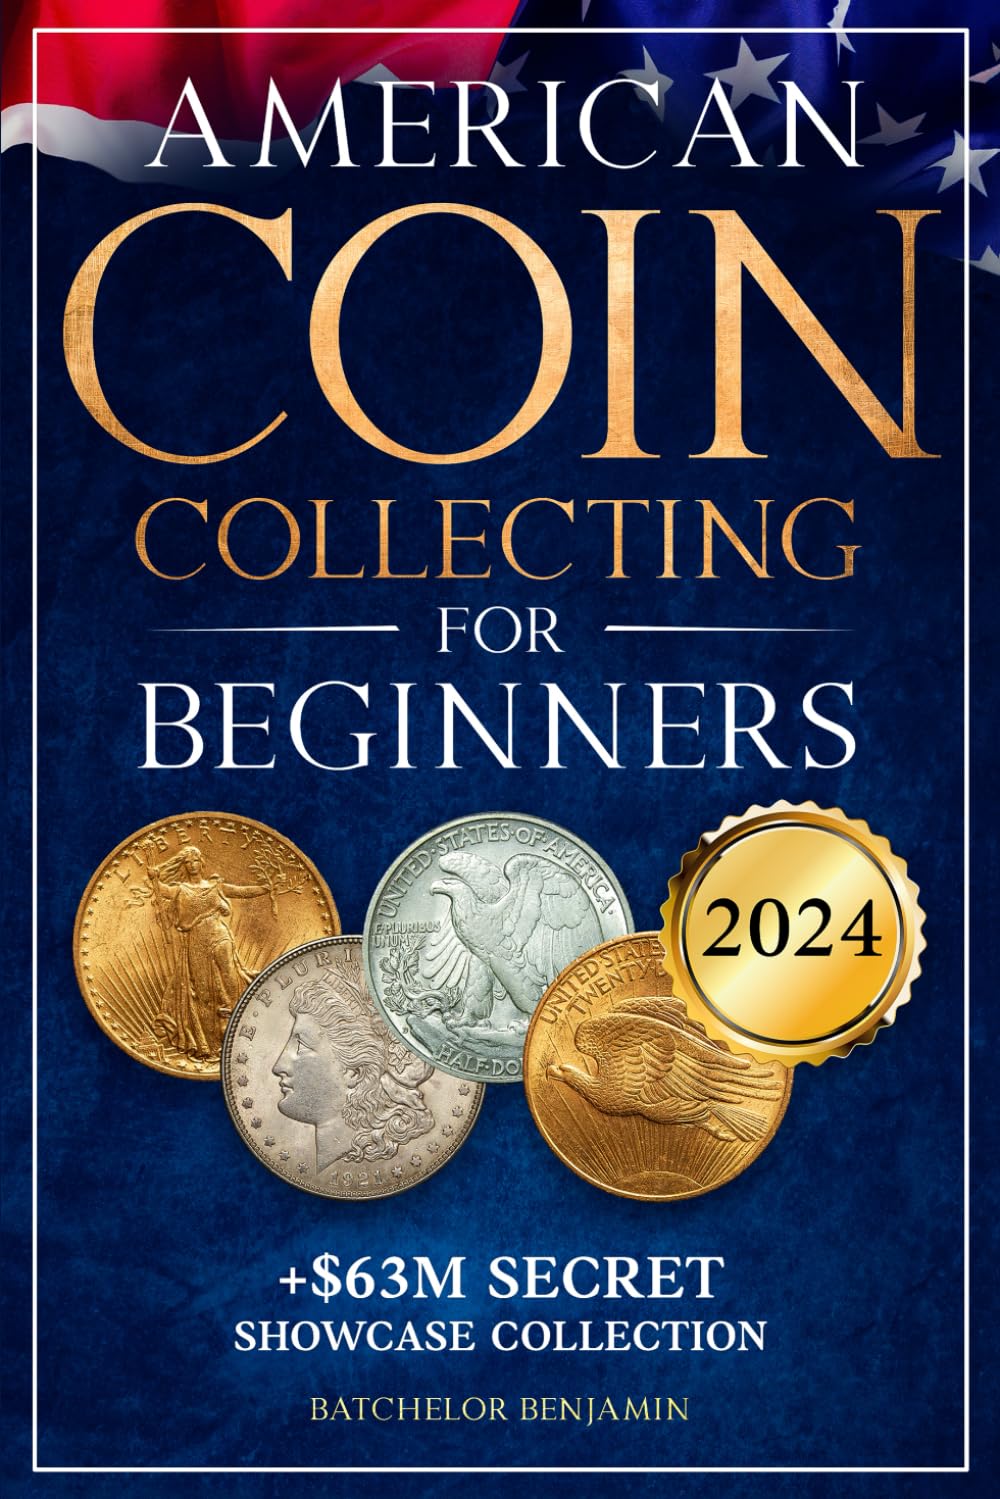 American Coin Collecting for Beginners: The Illustrated Guide to Identify & Evaluate the Most Rare and Sought-After Coins in the USA + $63M Secret Showcase Collection